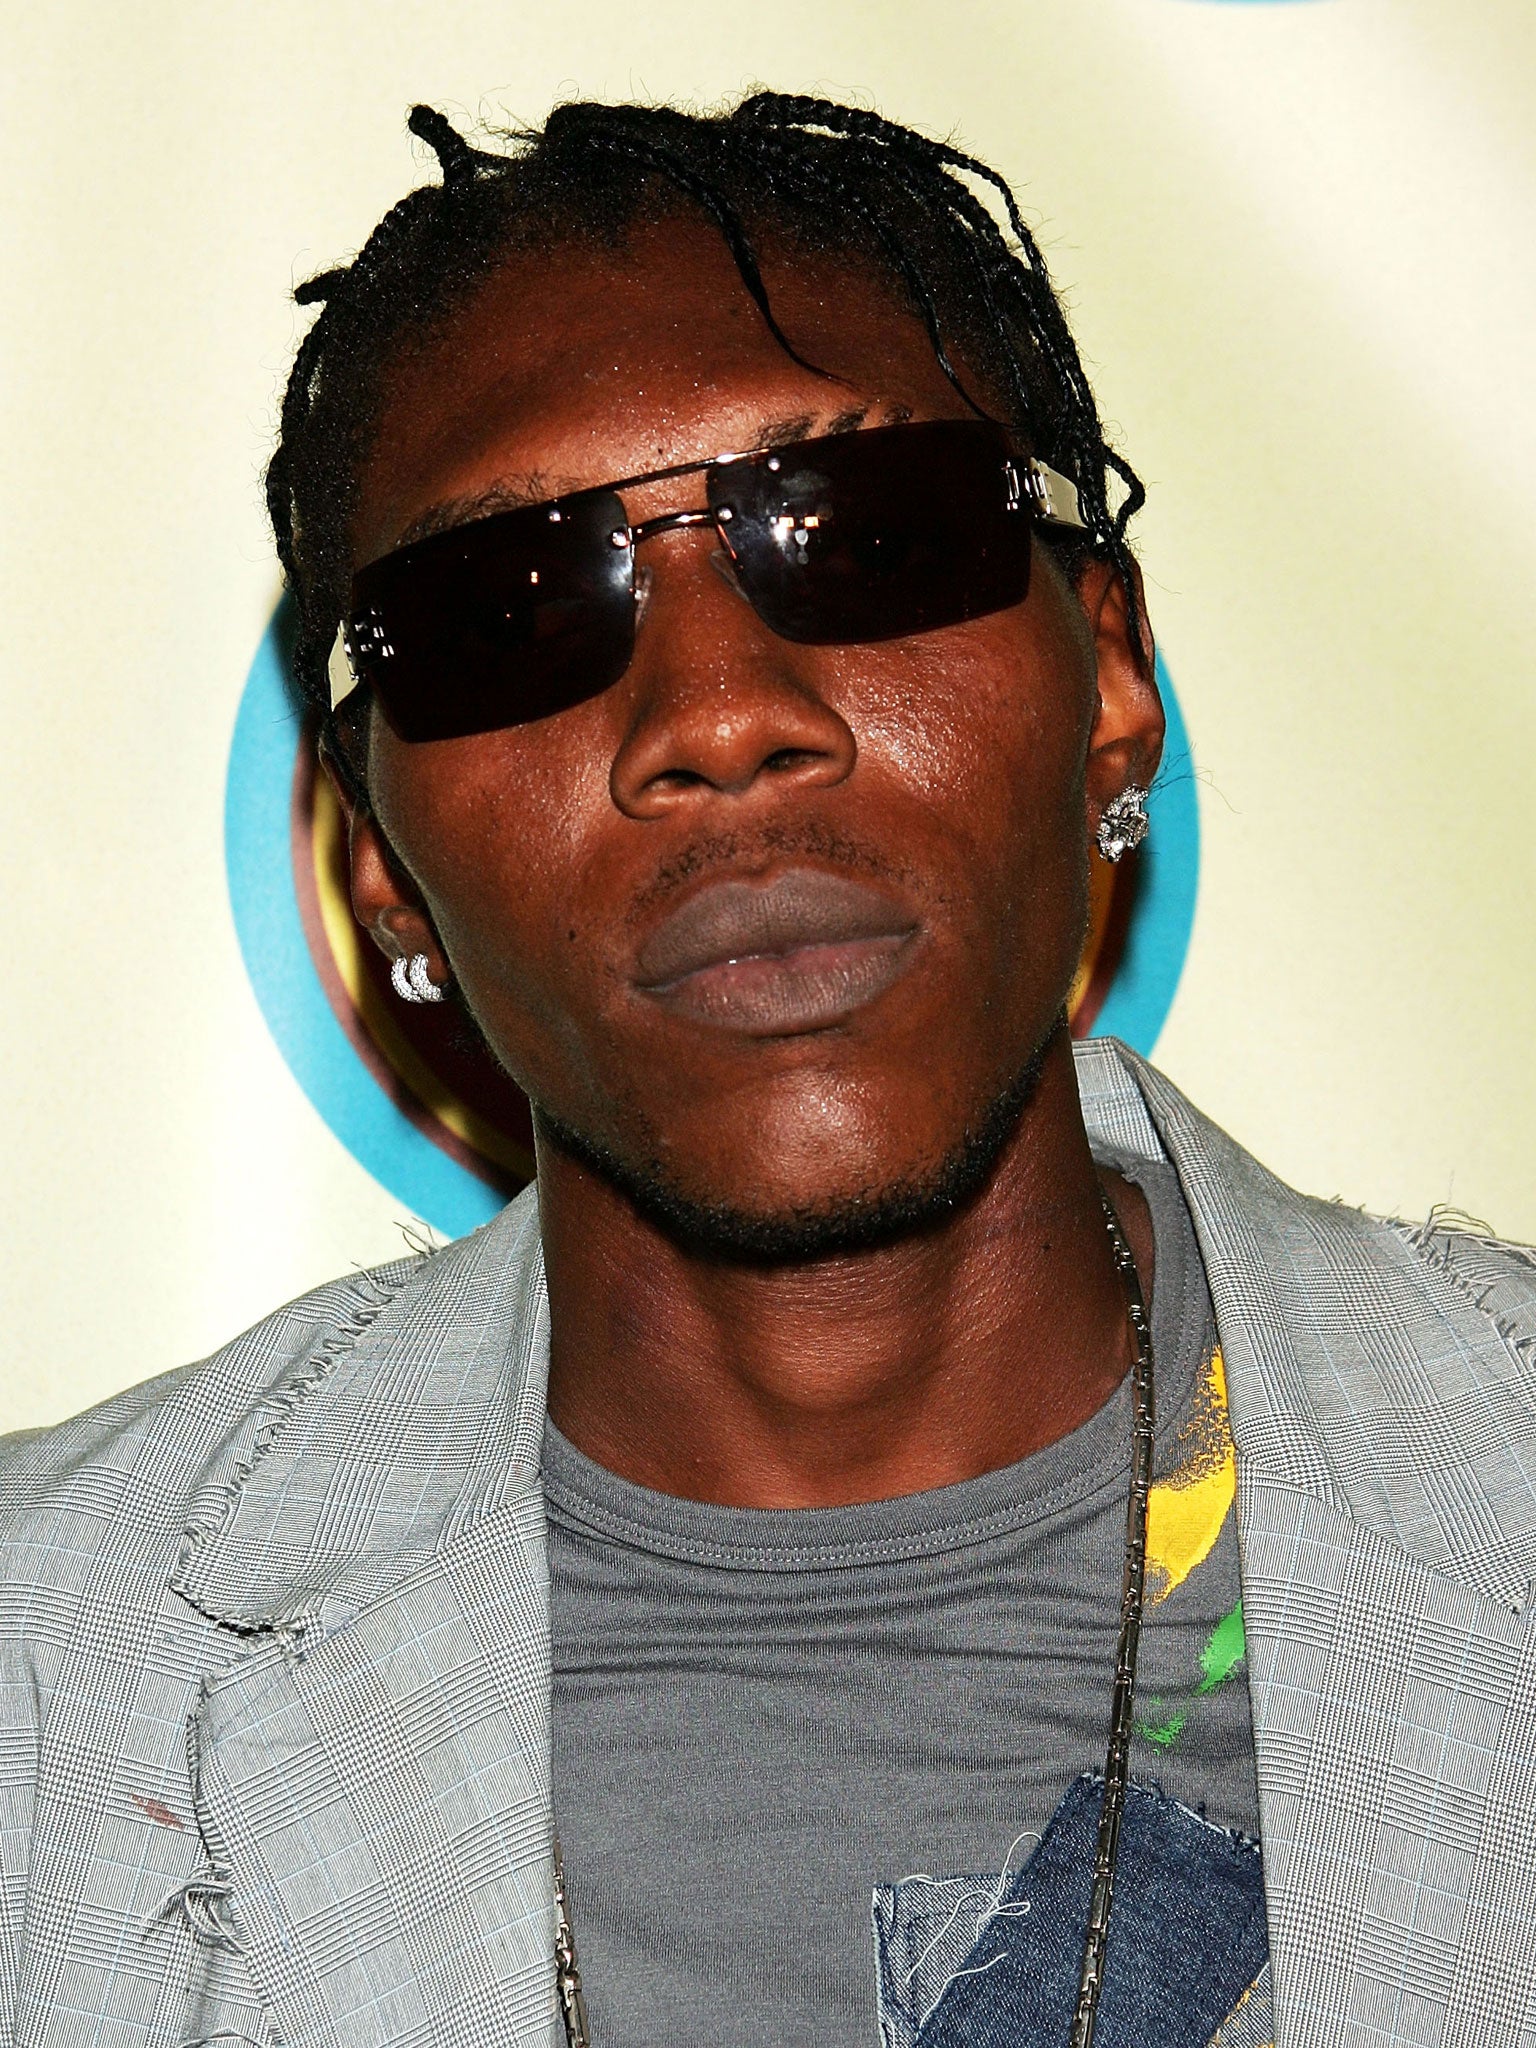 Jamaican dance-hall star Vybz Kartel has been sentenced to life in prison for the 2011 murder of an associate. He will not be eligible for parole until he is 73.